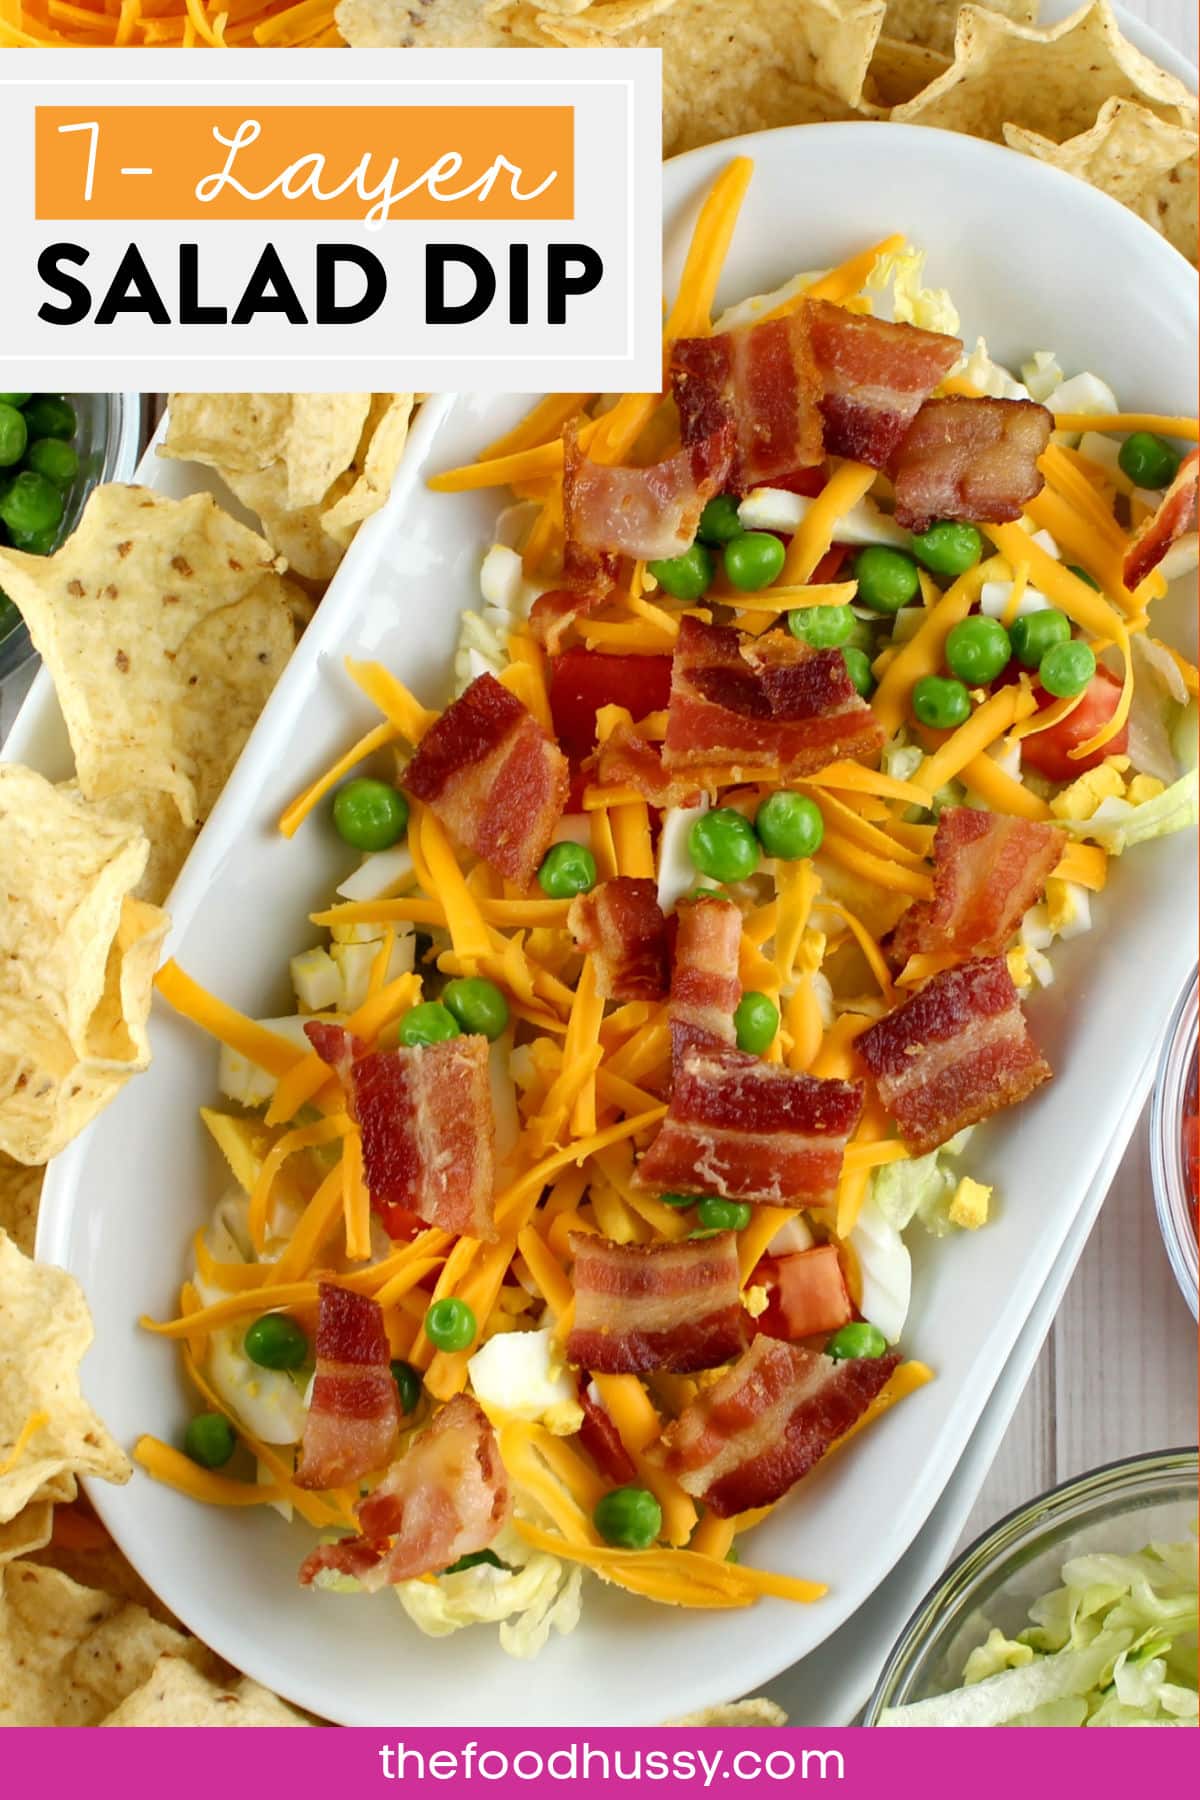 Seven Layer Salad Dip is a great and easy party appetizer! You just take all the things you love about the salad - but make it into a dip! Grab those scoops chips and dig in - it tastes just like the traditional 7 Layer Salad! via @foodhussy